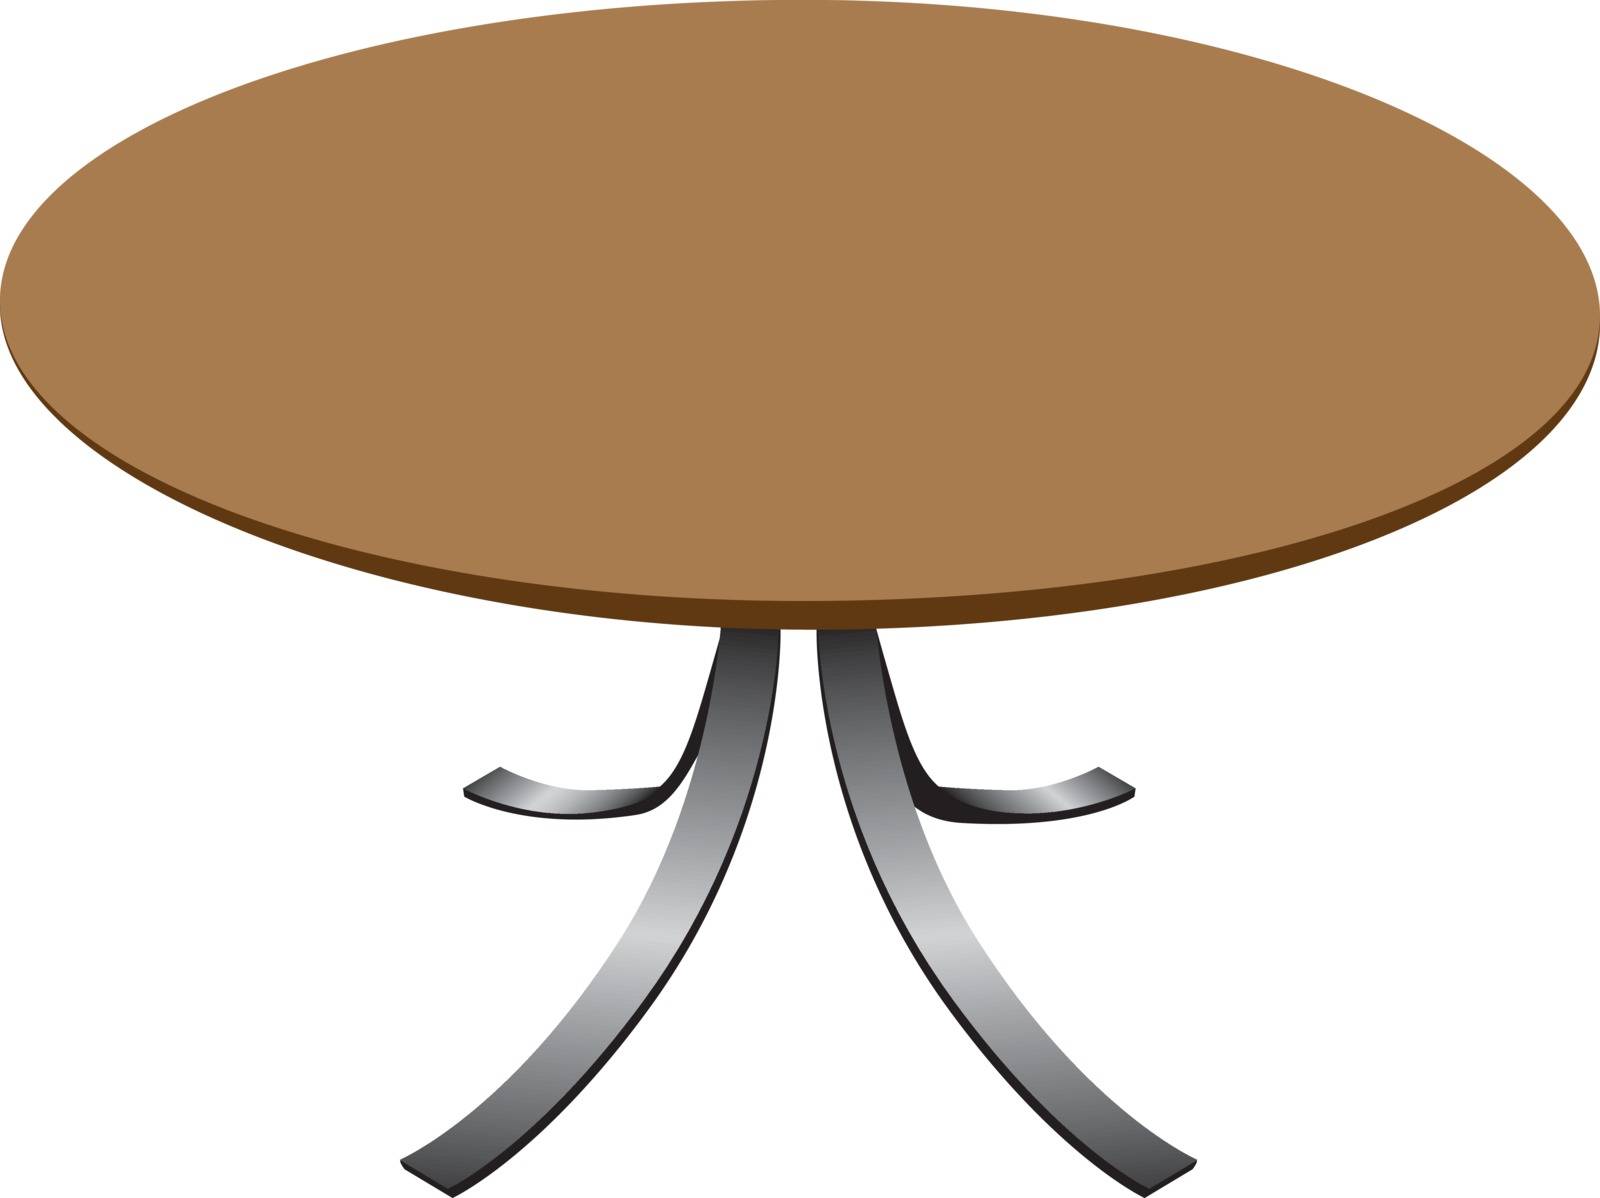 Round designer table. Modern wooden table with steel legs.